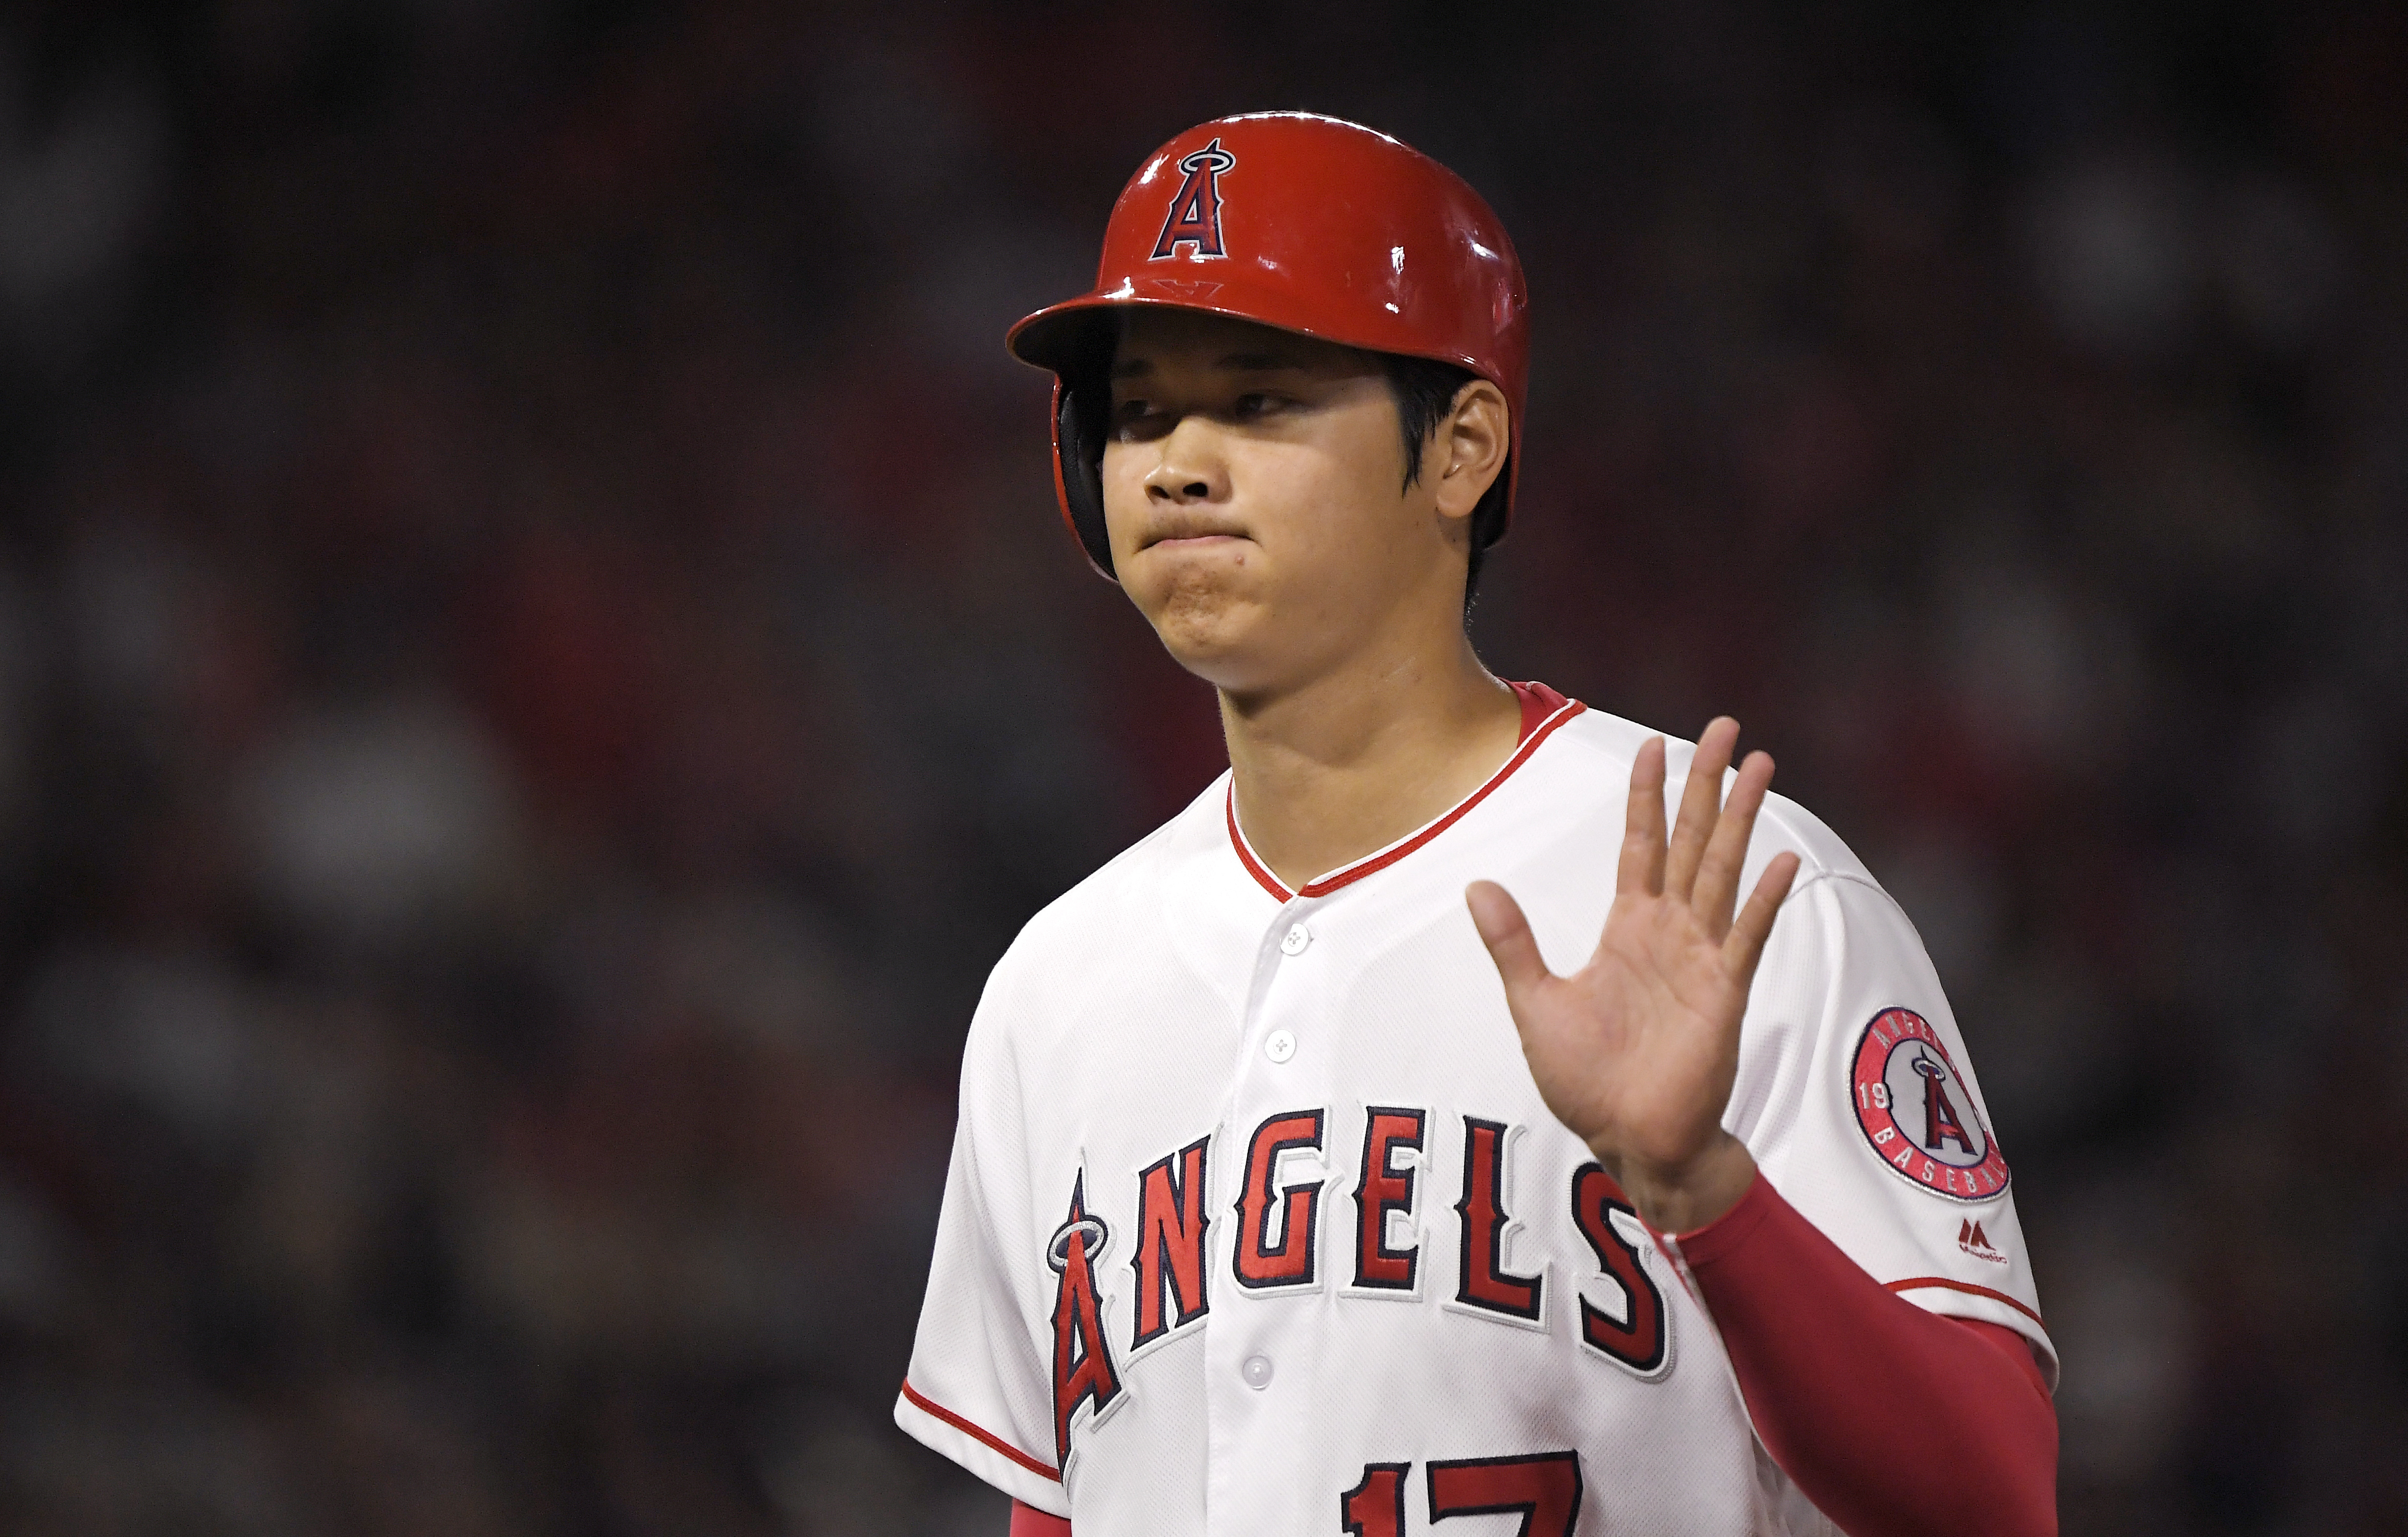 Angels' Shohei Ohtani to throw bullpen session Saturday